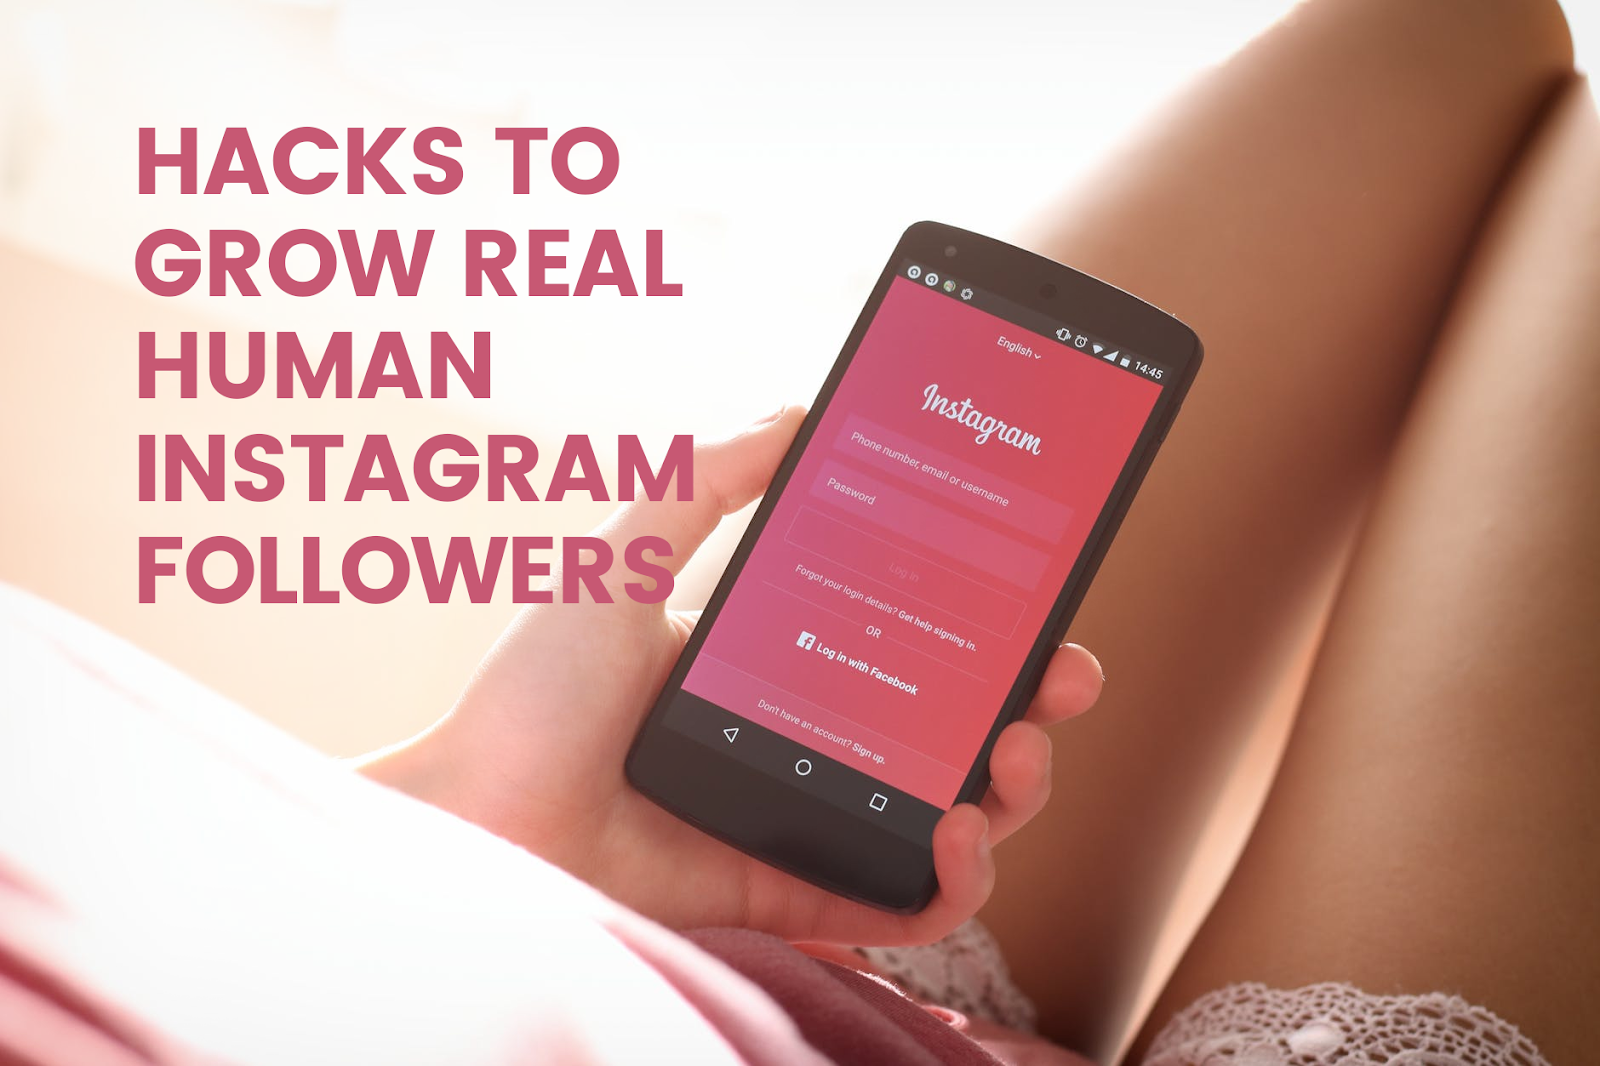 12 Best Free Instagram Followers App for Android and iPhone